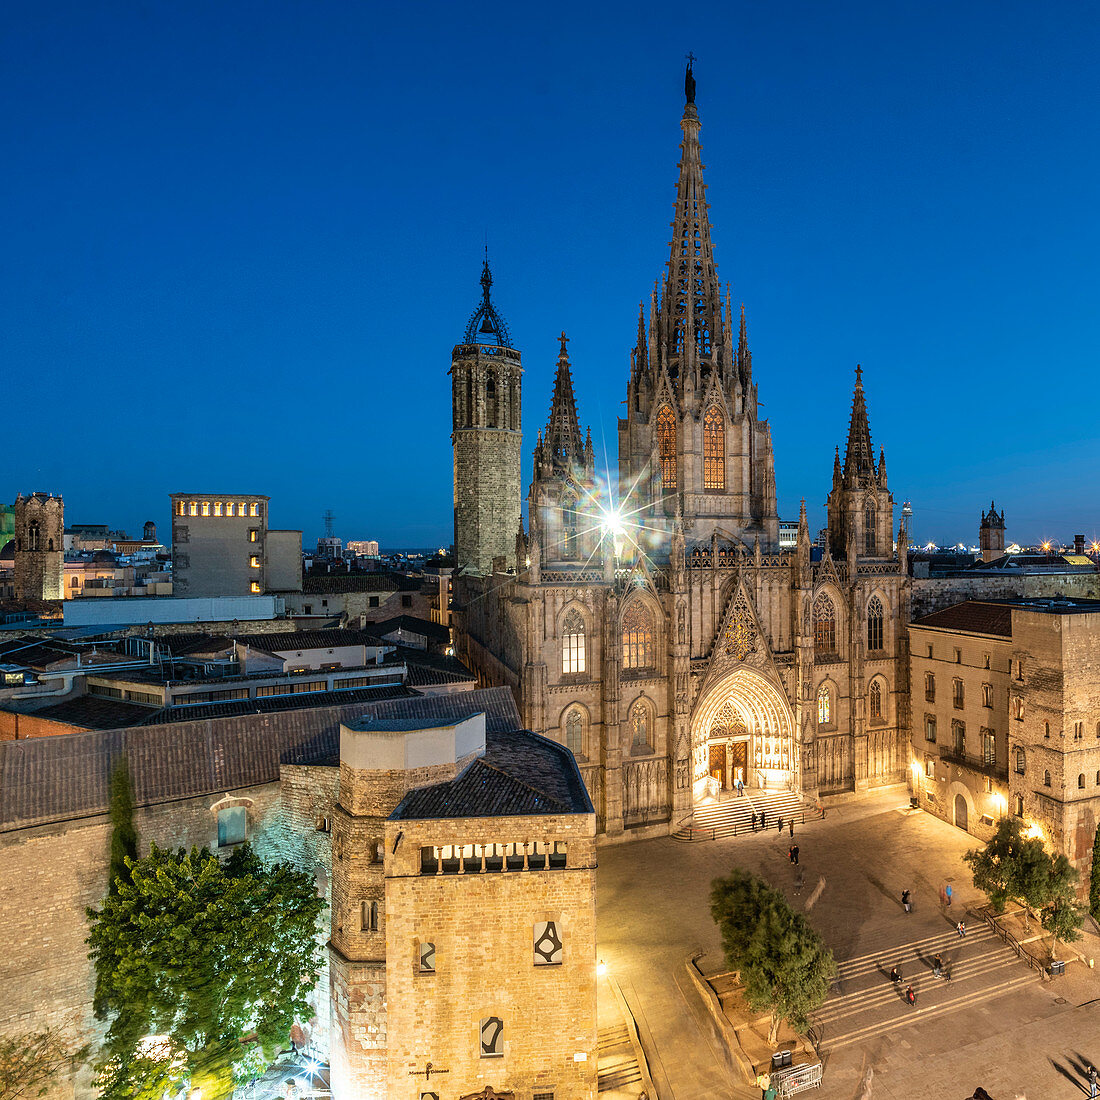 View of Barcelona Cathedral from the roof terrace of the Hotel Colon in the Gothic Quarter of Barcelona, Spain